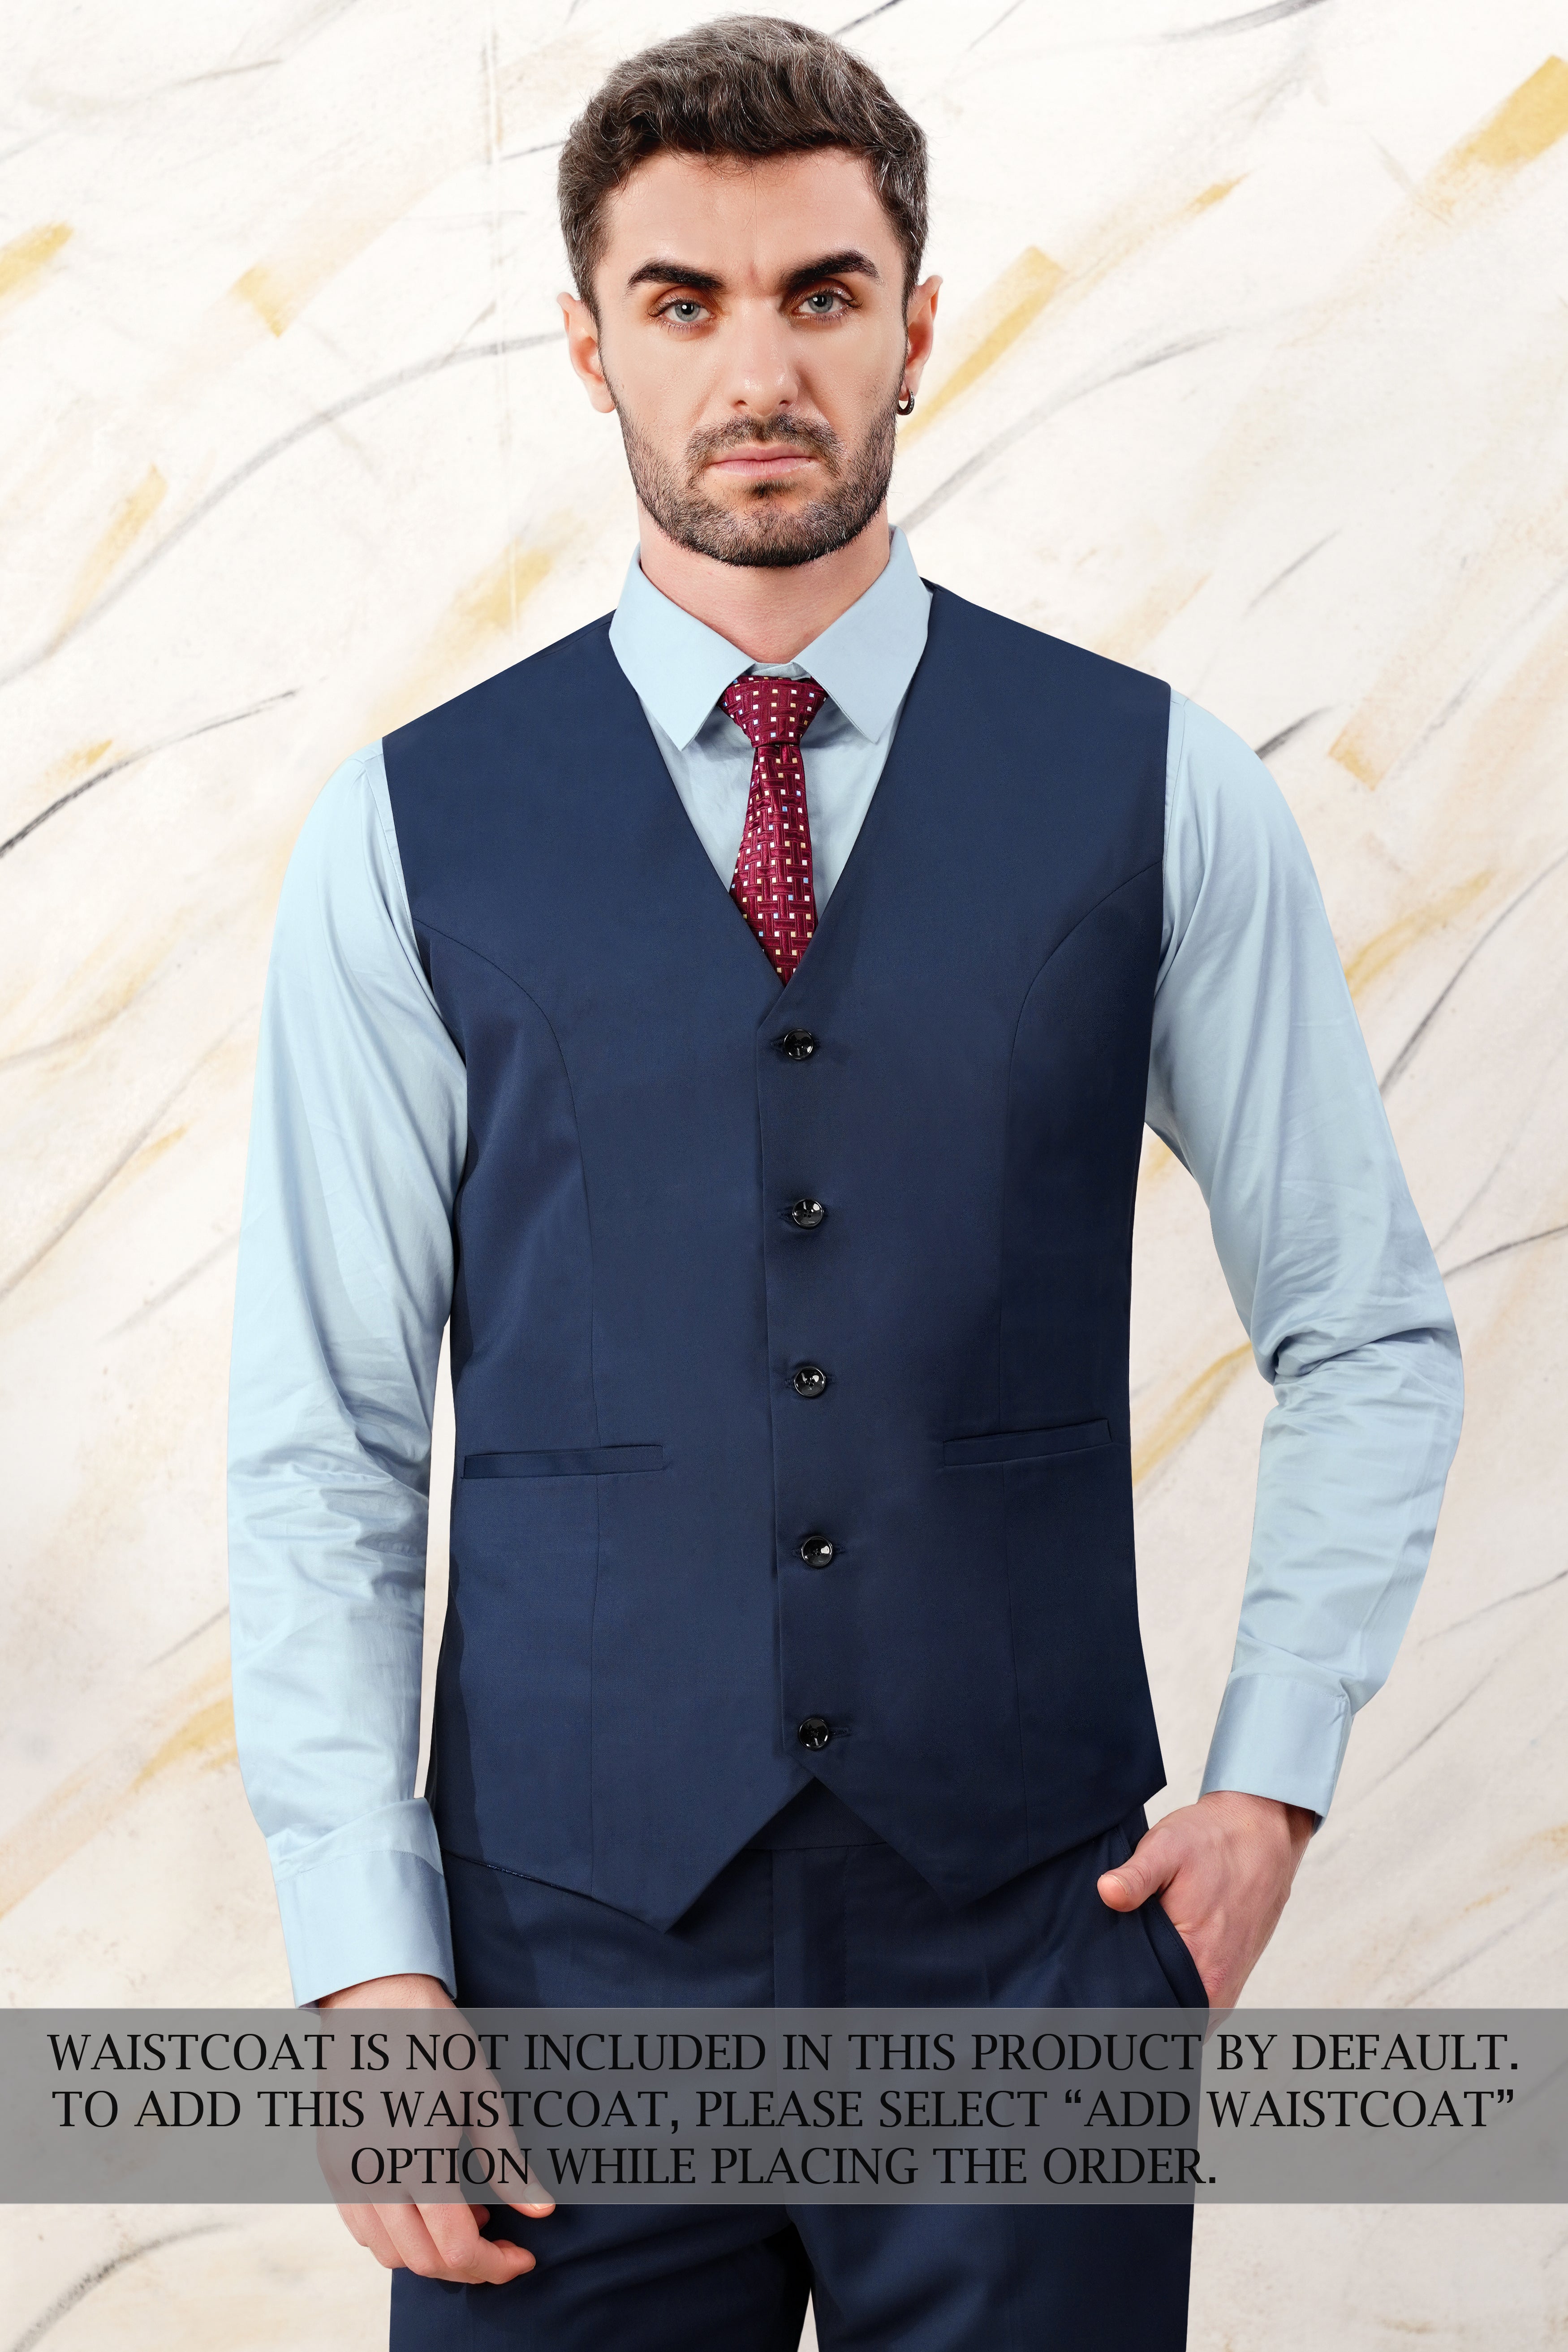 Cloud Burst Blue Wool Rich Double Breasted Sports Suit ST3075-DB-PP-36, ST3075-DB-PP-38, ST3075-DB-PP-40, ST3075-DB-PP-42, ST3075-DB-PP-44, ST3075-DB-PP-46, ST3075-DB-PP-48, ST3075-DB-PP-50, ST3075-DB-PP-52, ST3075-DB-PP-54, ST3075-DB-PP-56, ST3075-DB-PP-58, ST3075-DB-PP-60